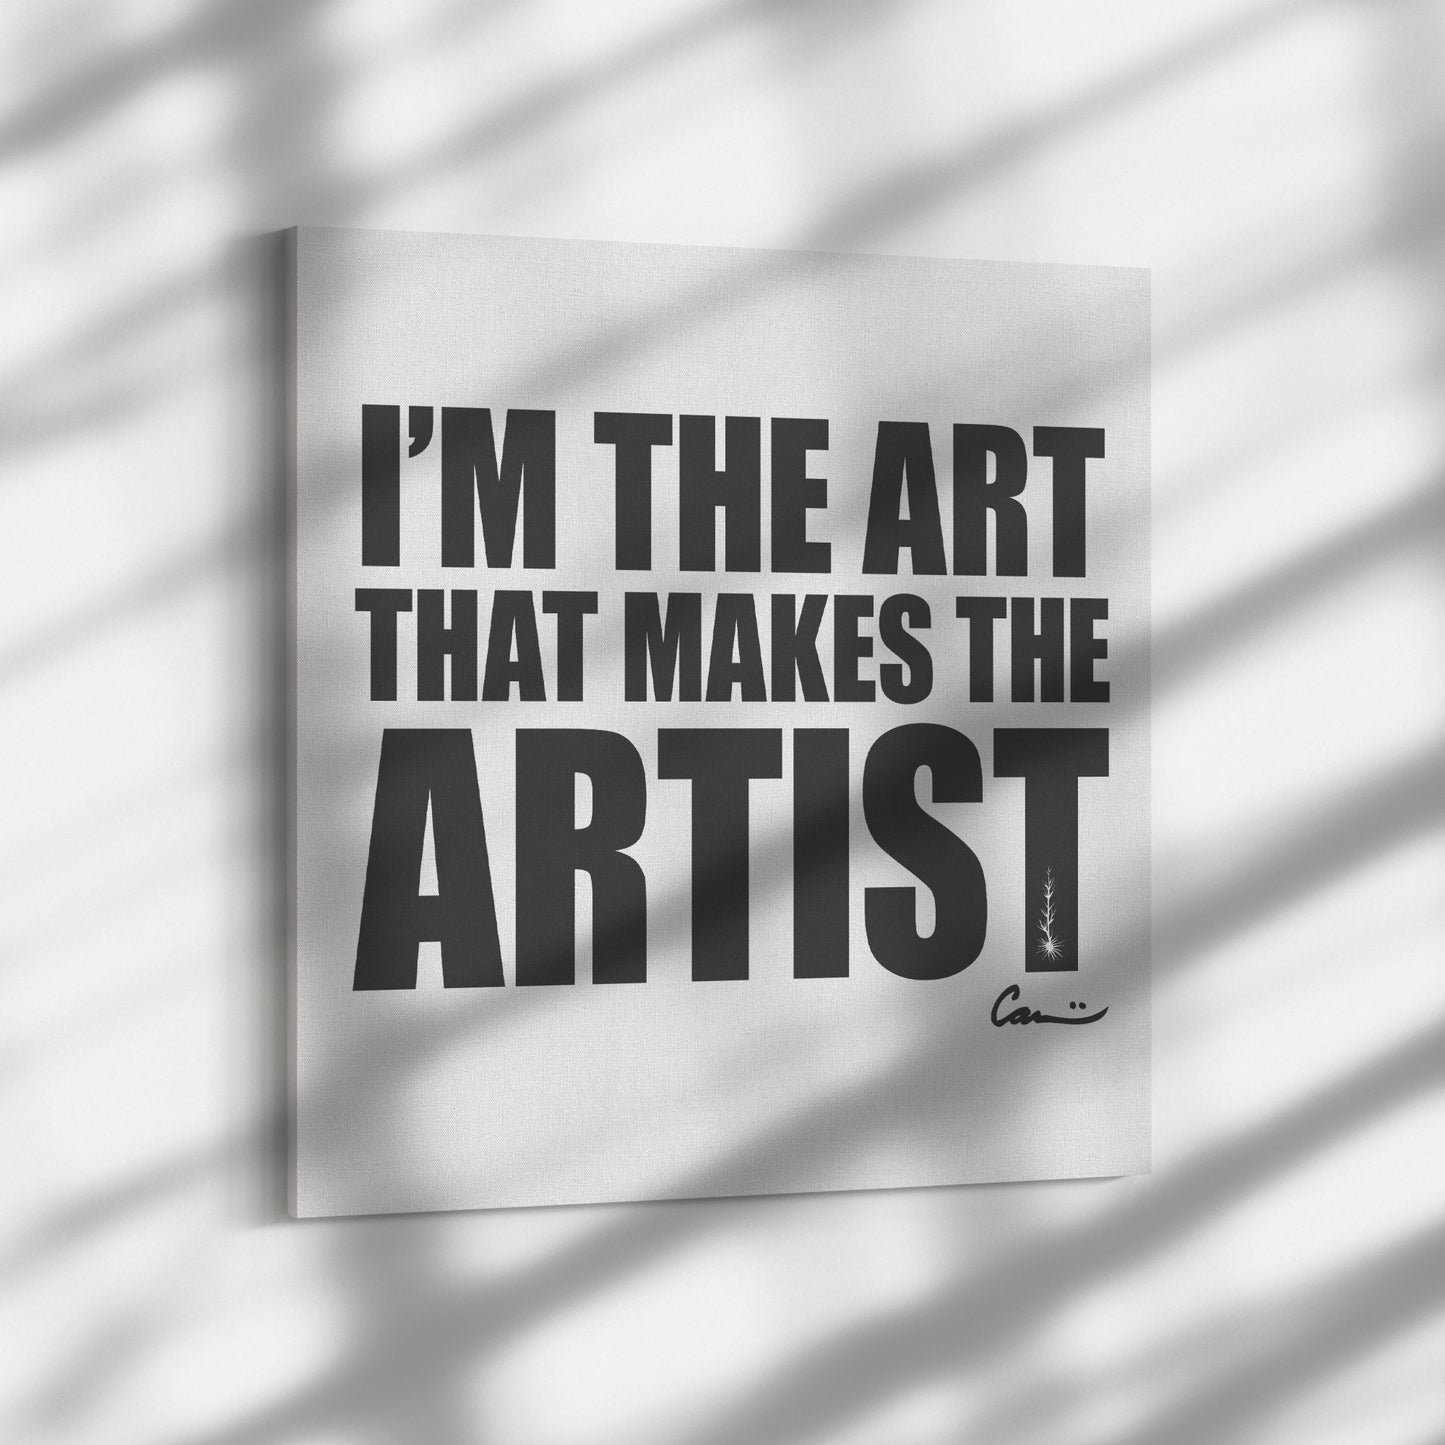 the best art quotes from Carini Arts